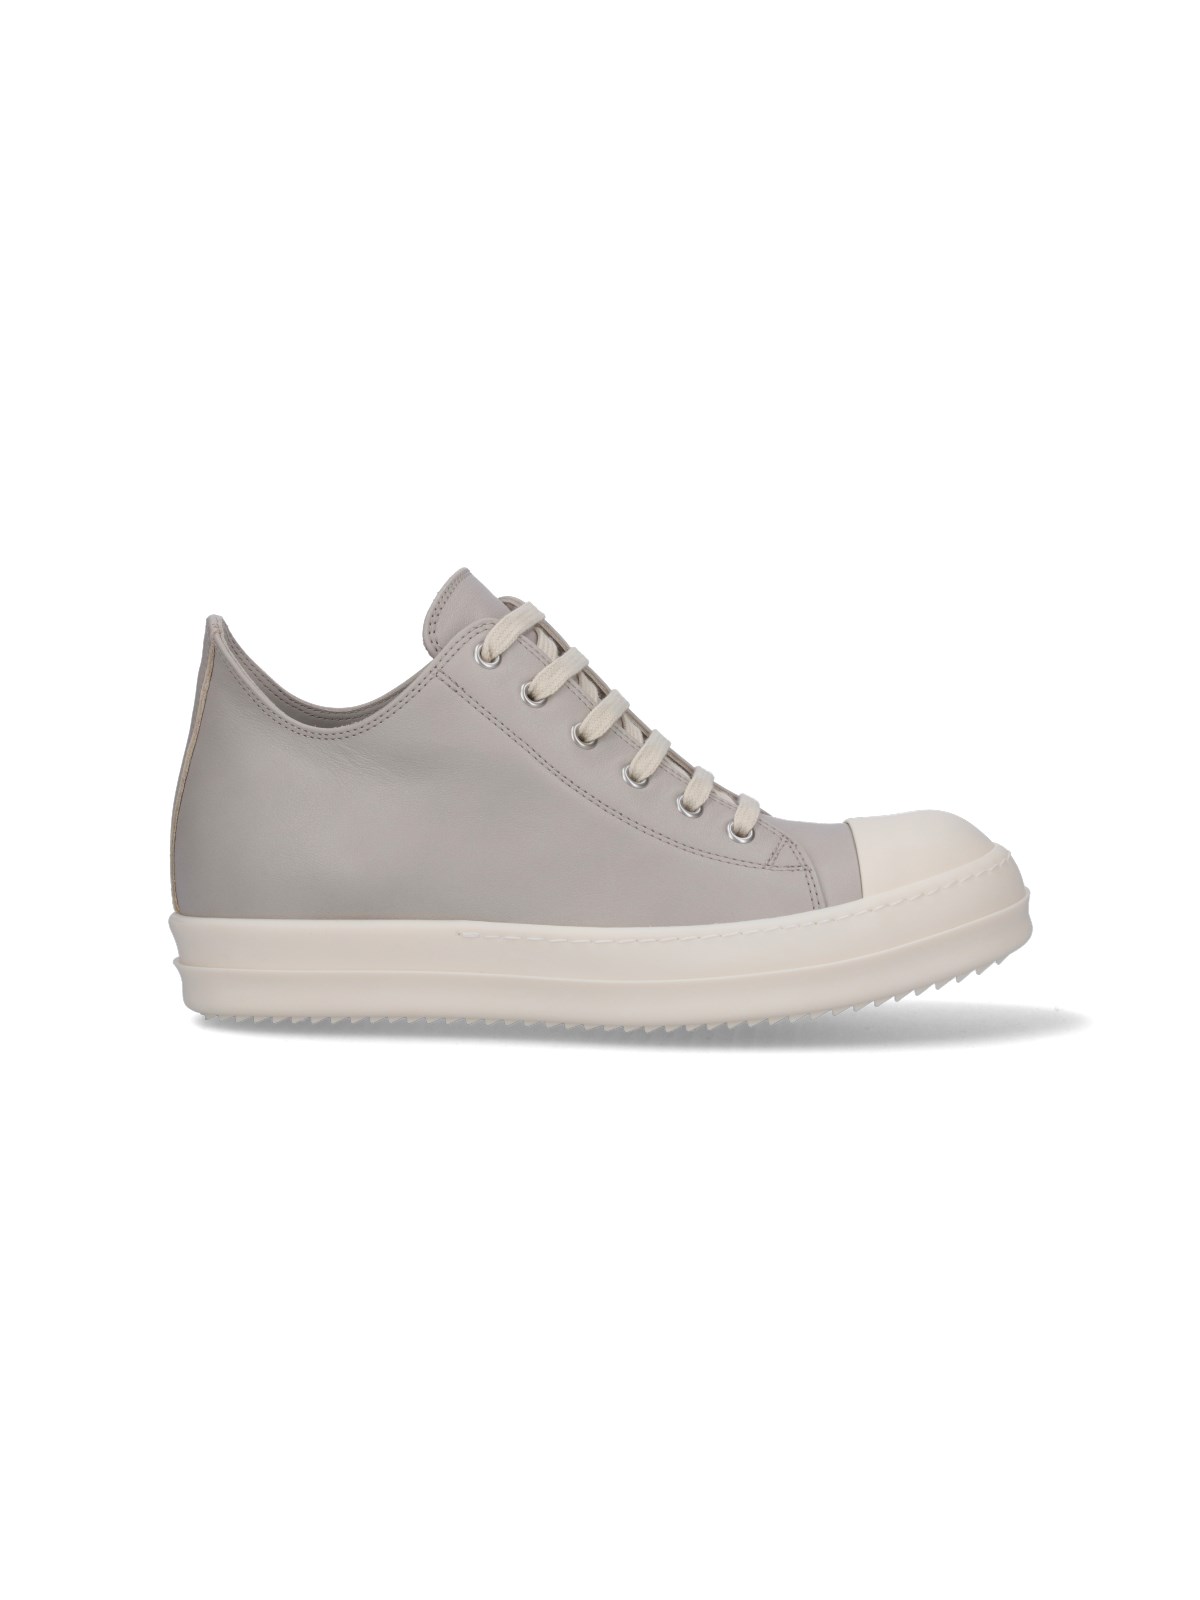 Rick Owens "lido Low" Trainers